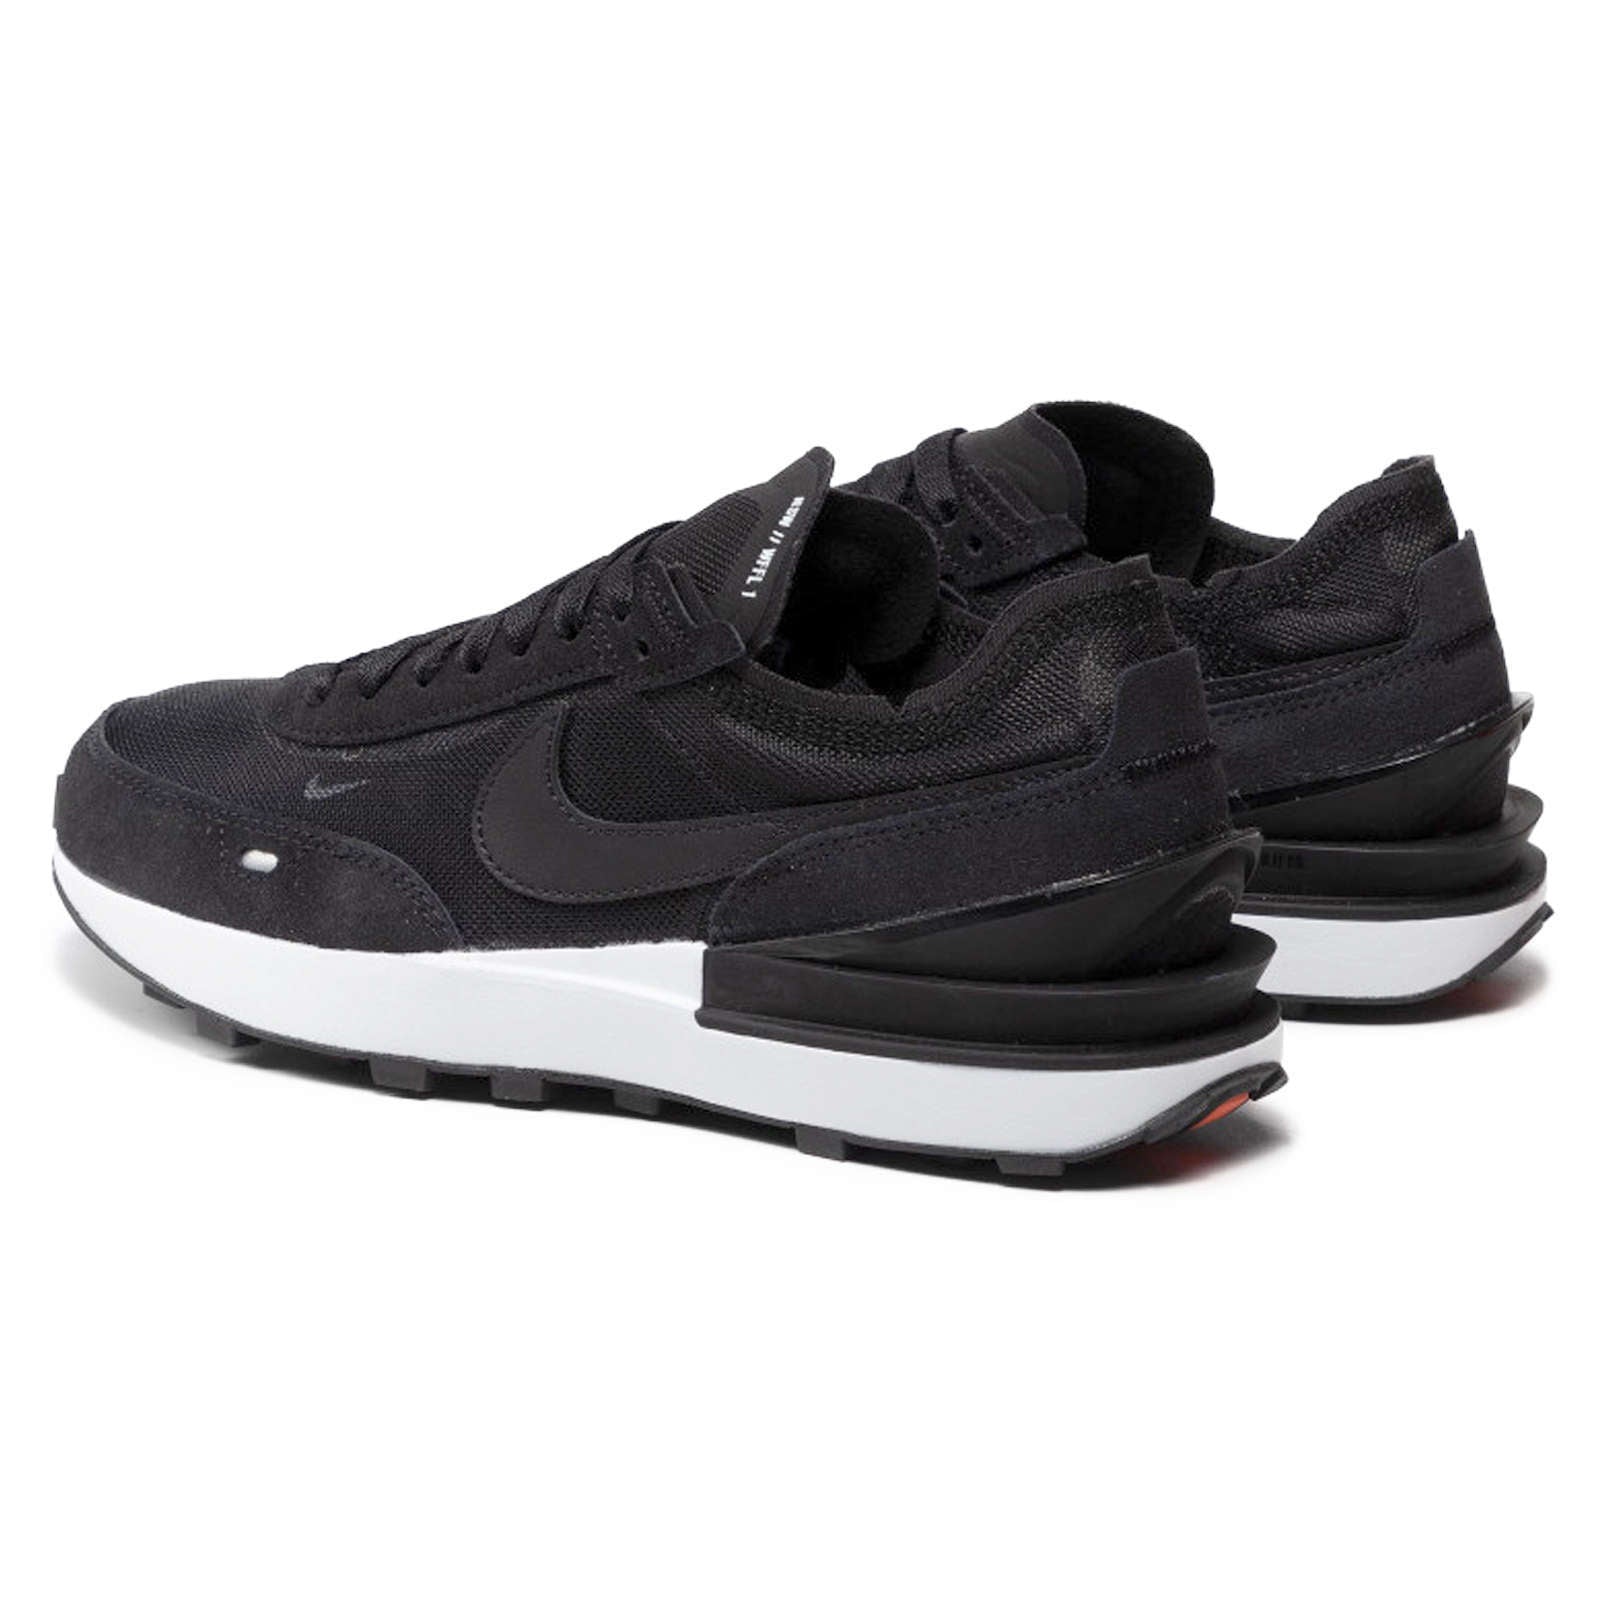 Nike Waffle One Leather Textile Men's Low-Top Sneakers#color_black black white orange